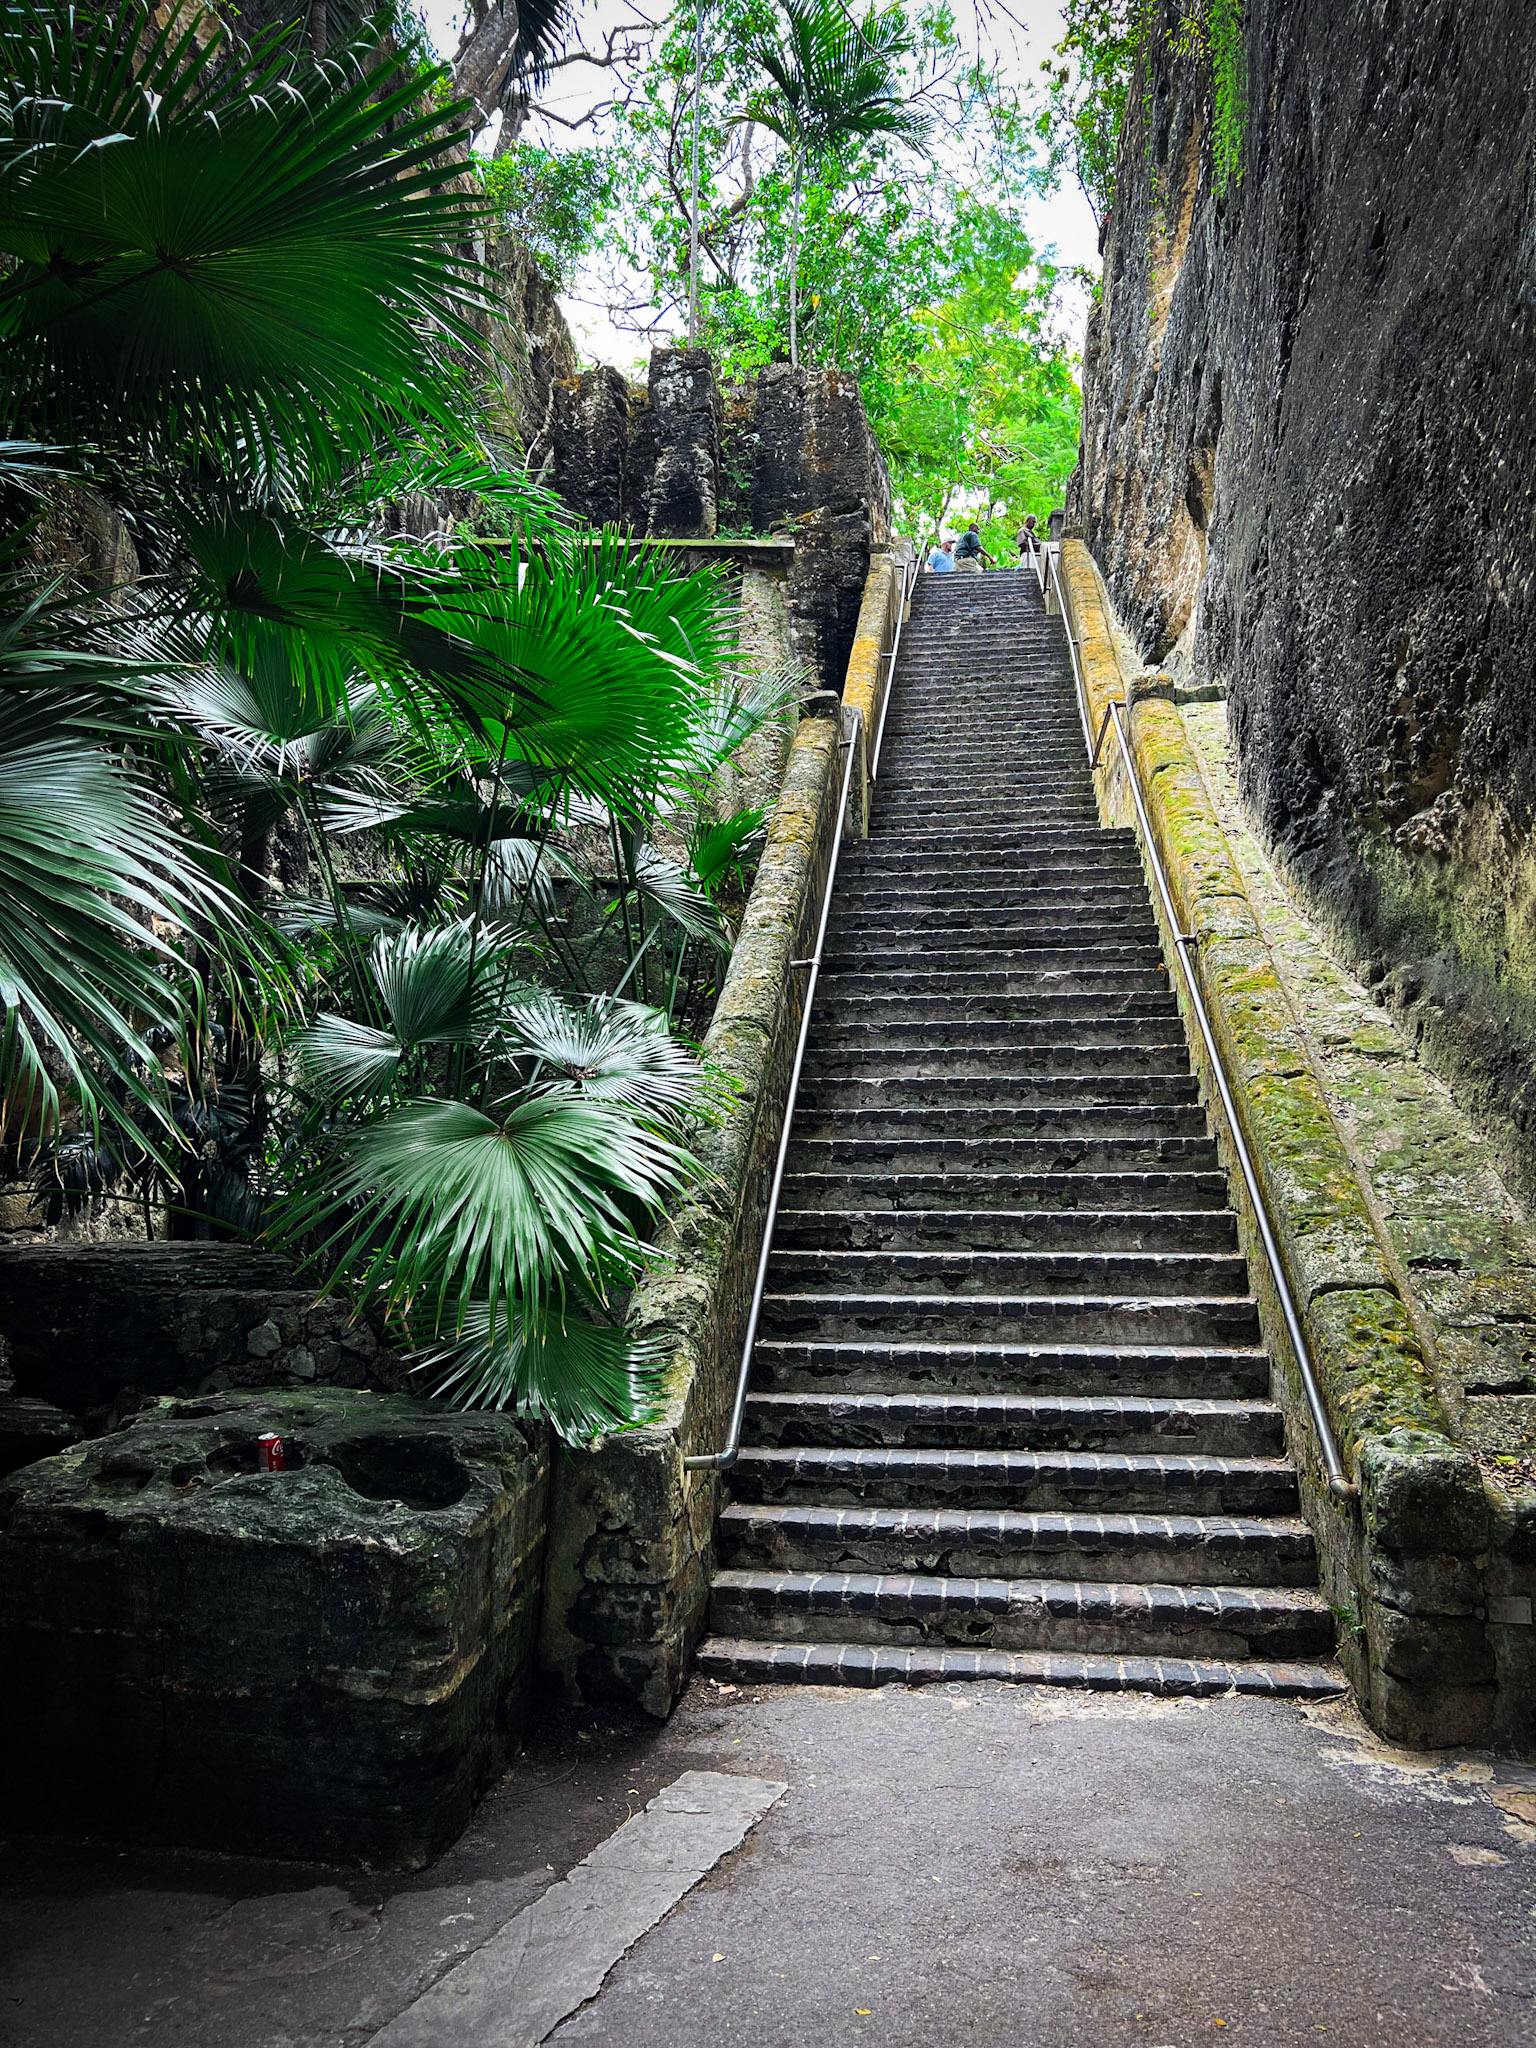 65 or 66 limestone stairs in a valley surrounded by lush tropical plants